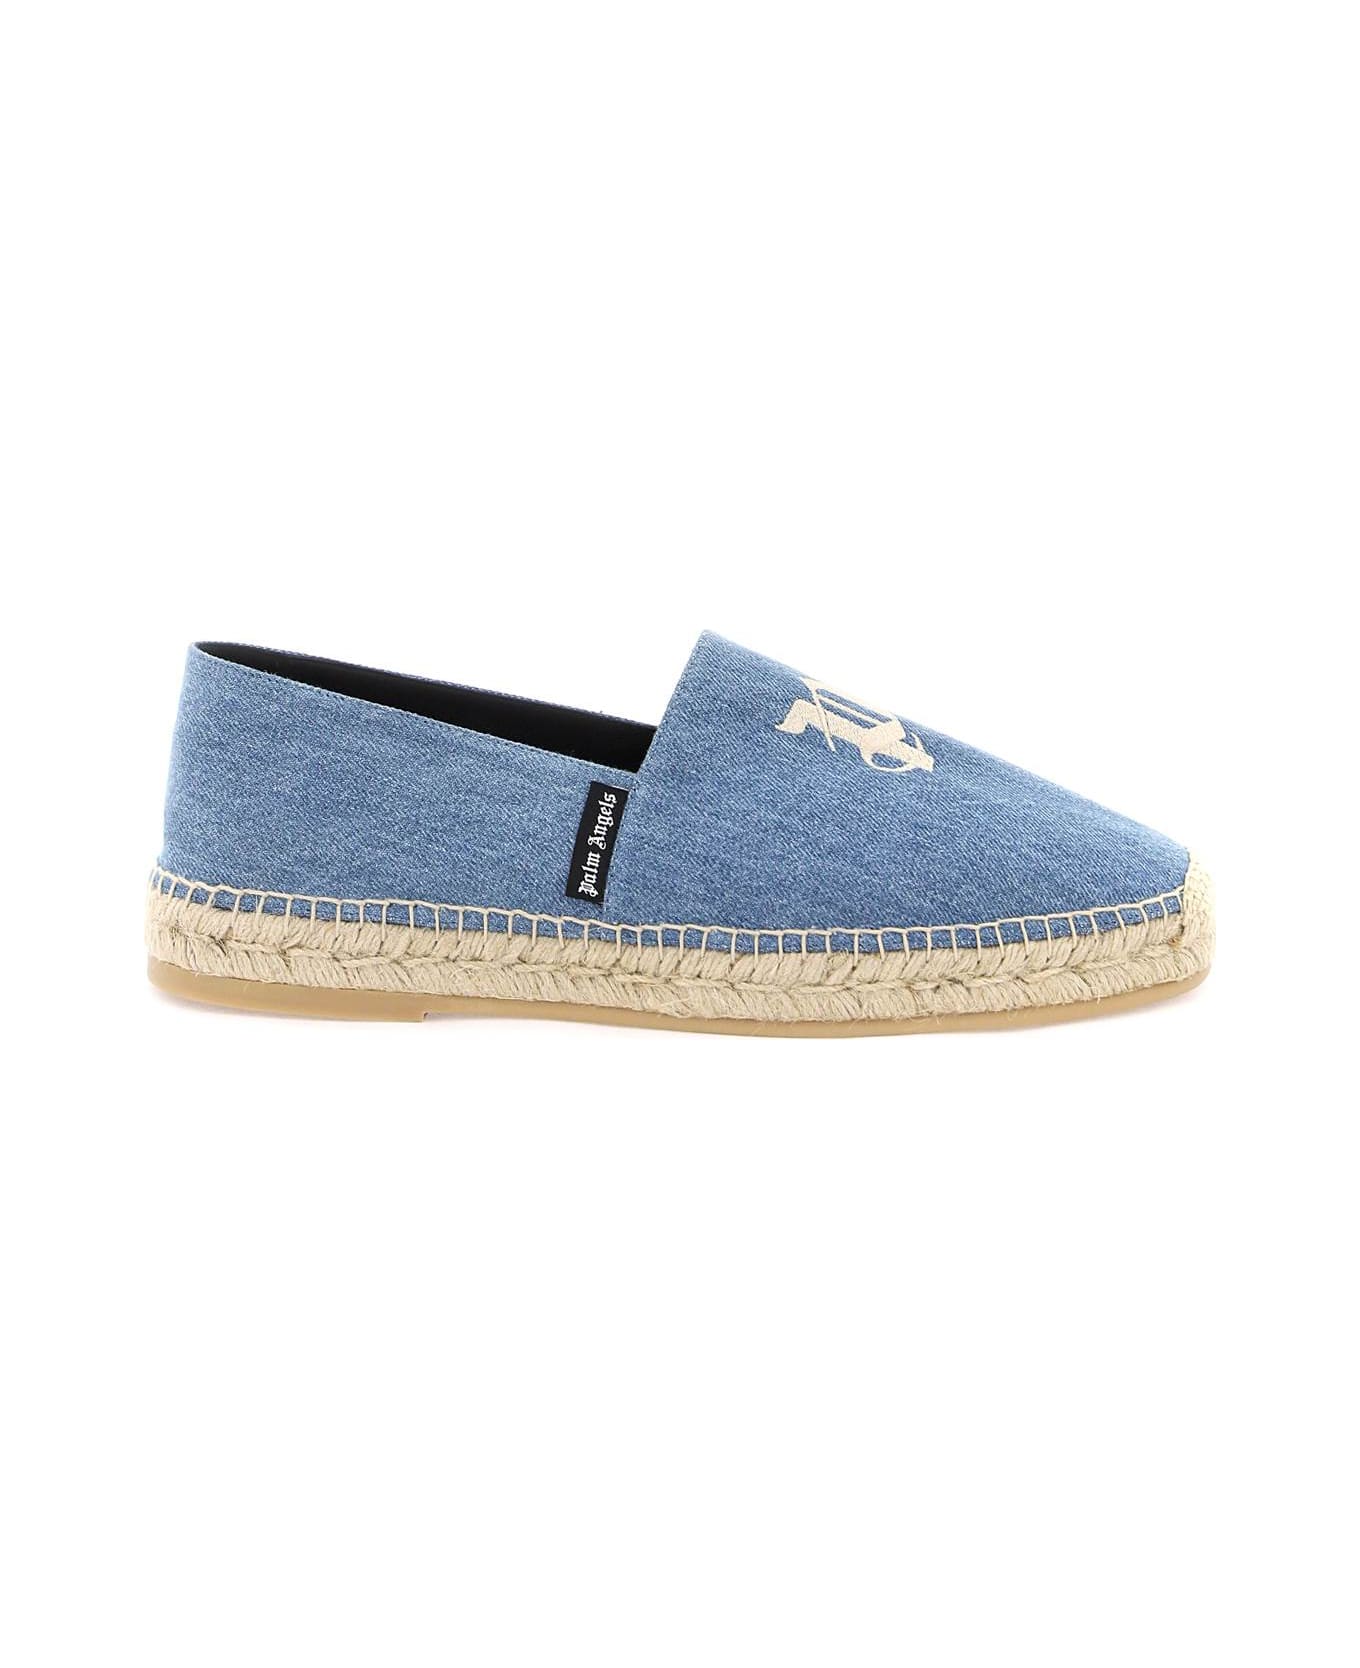 Palm Angels Espadrilles With Embroidered Logo - BLUE NO COLOR (Blue) その他各種シューズ